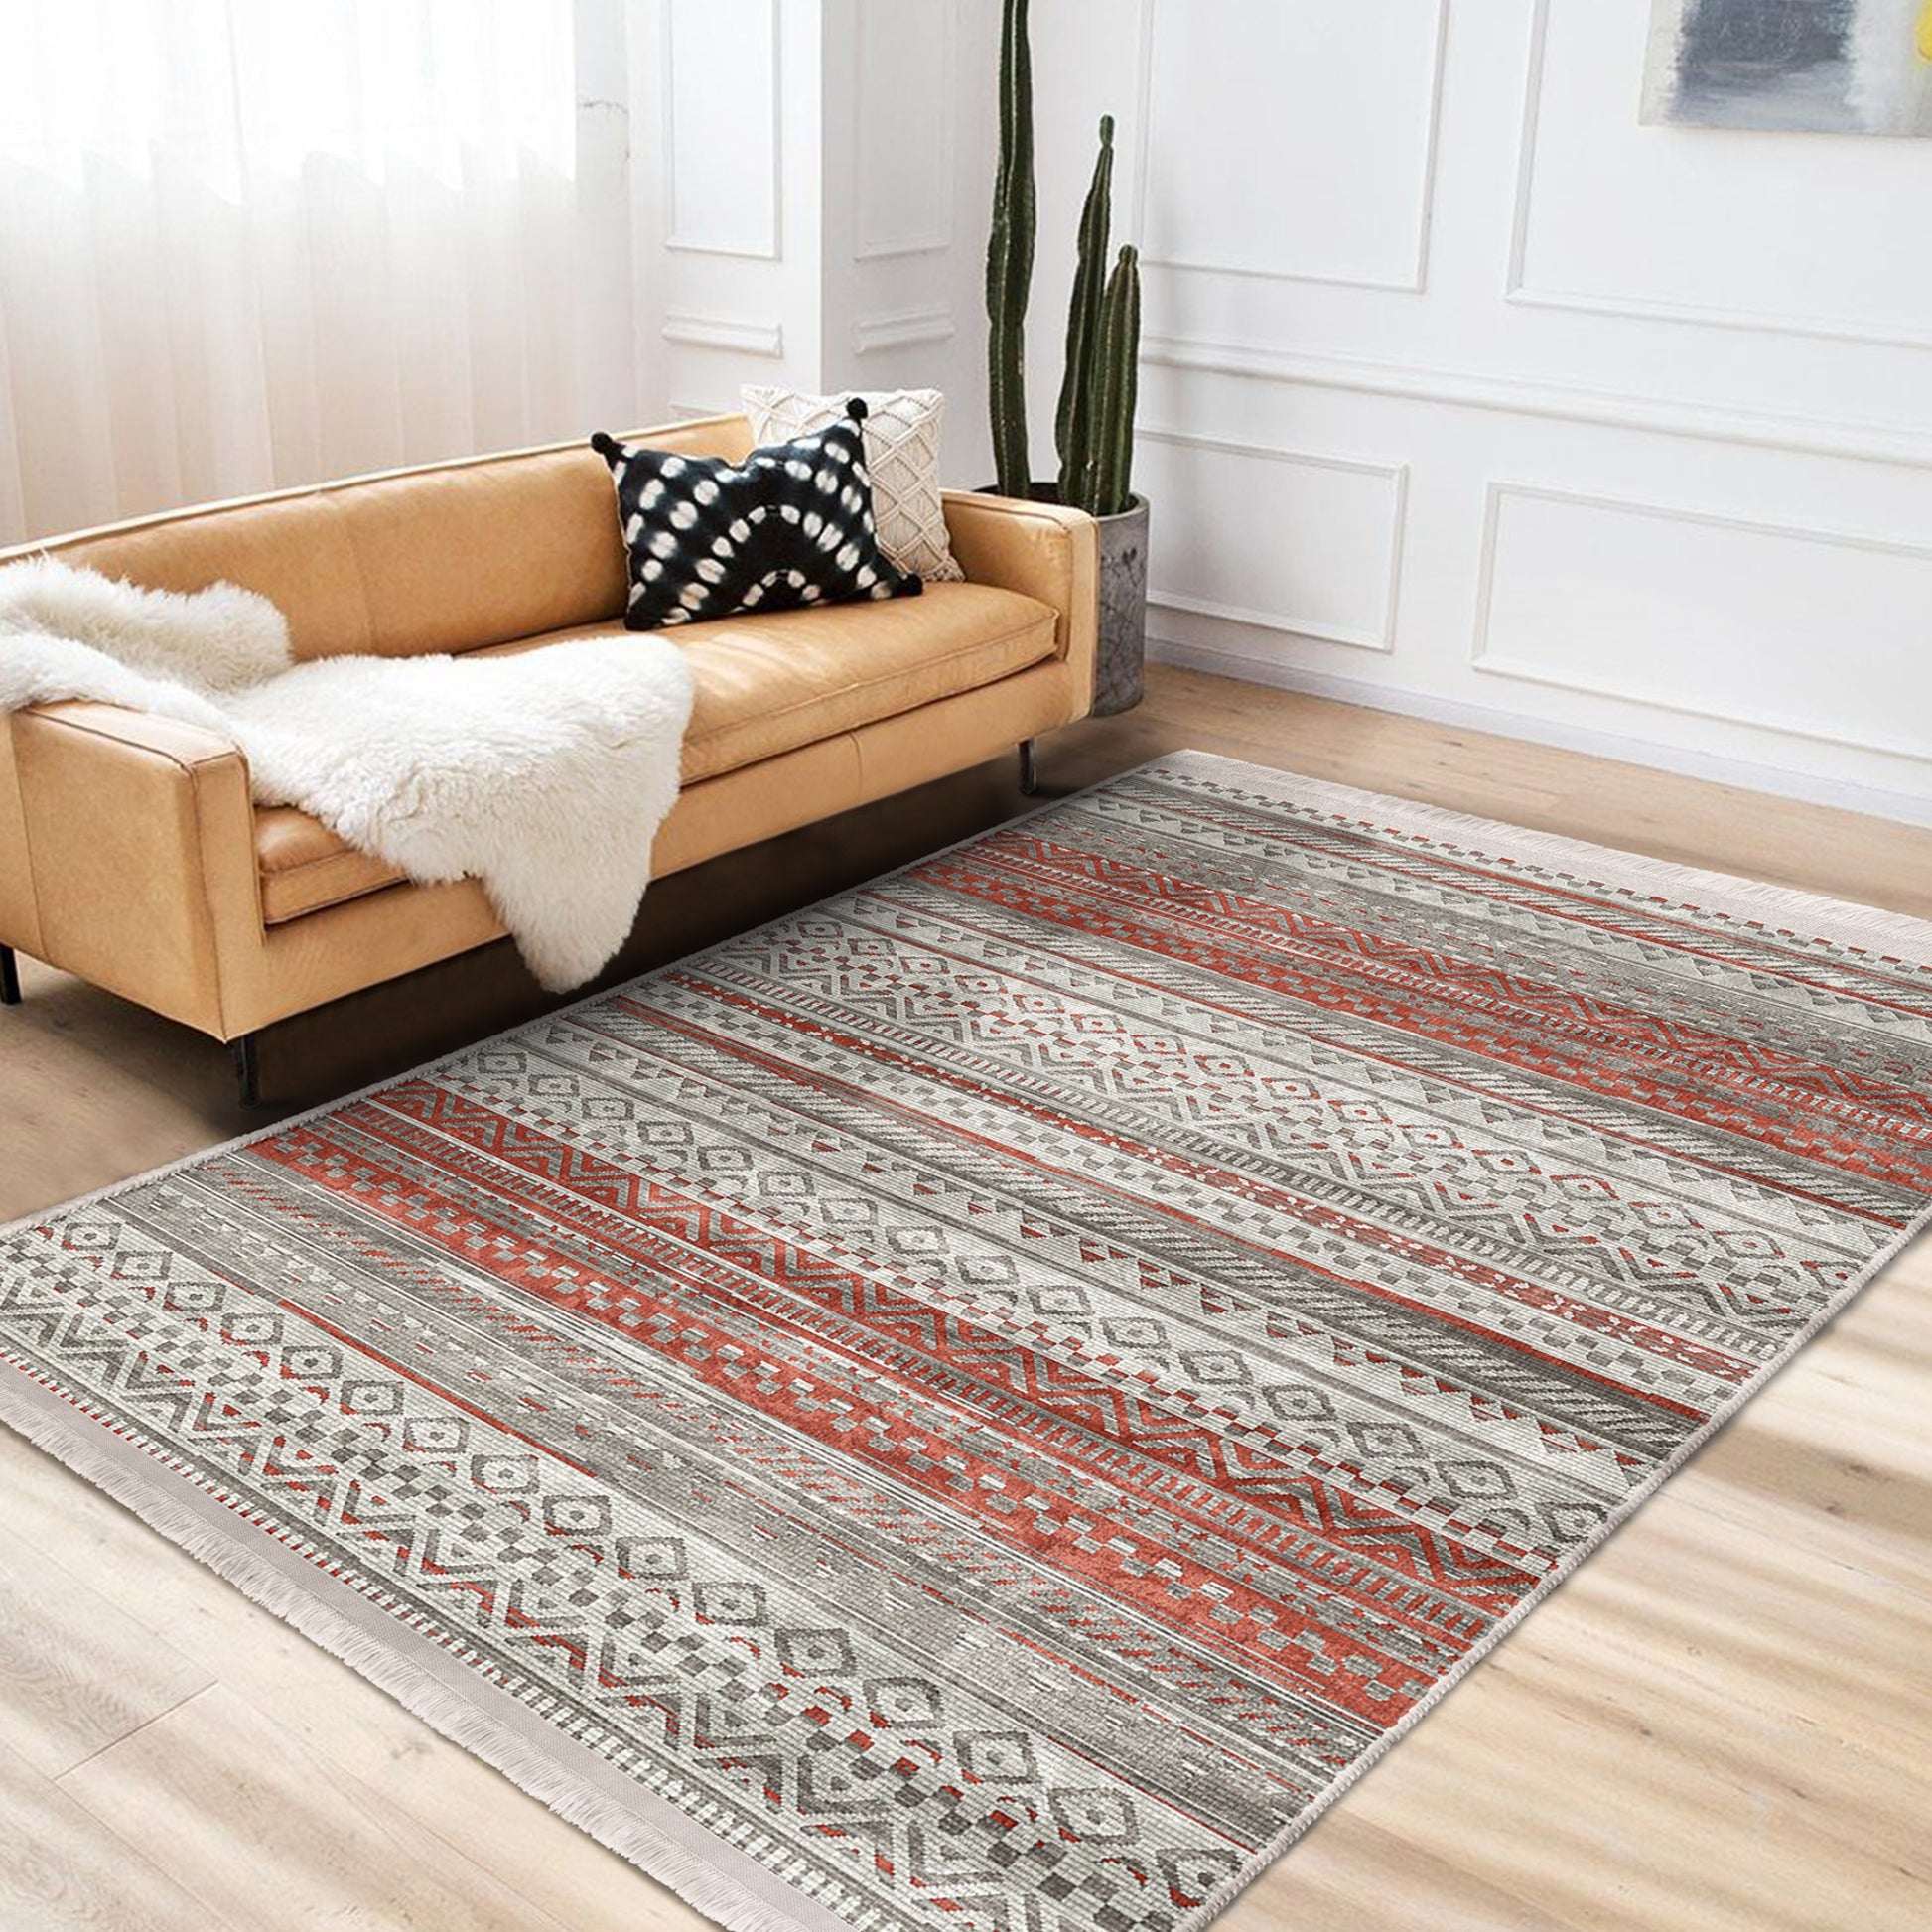 Elegant Rug with Classic Moroccan Design for Home Decor